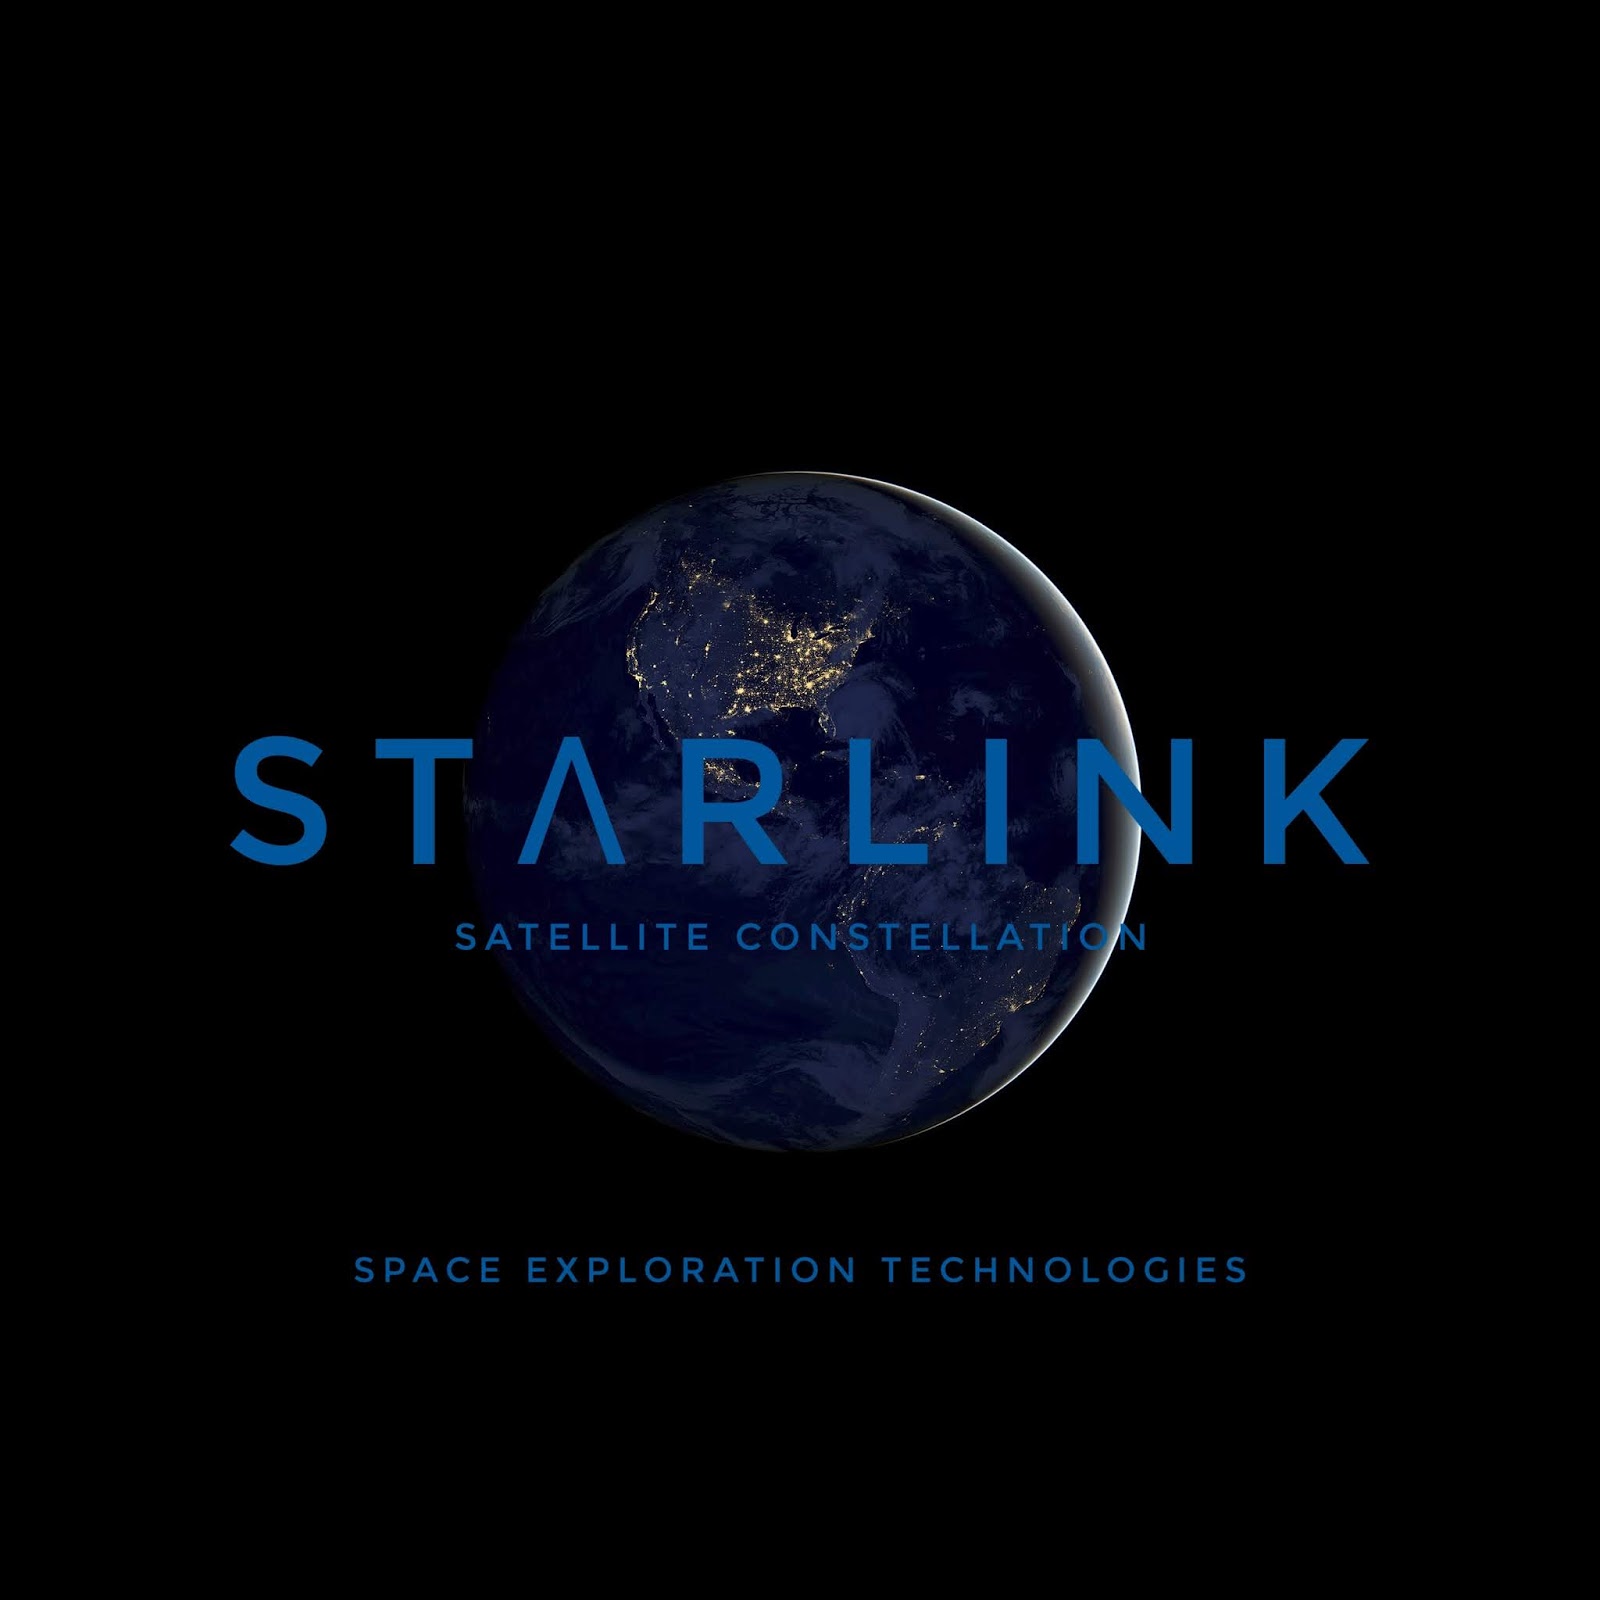 SPACEX - STARLINK 6 LAUNCHED INTO ORBIT | Article - Wed 22 Apr 2020 09: ...